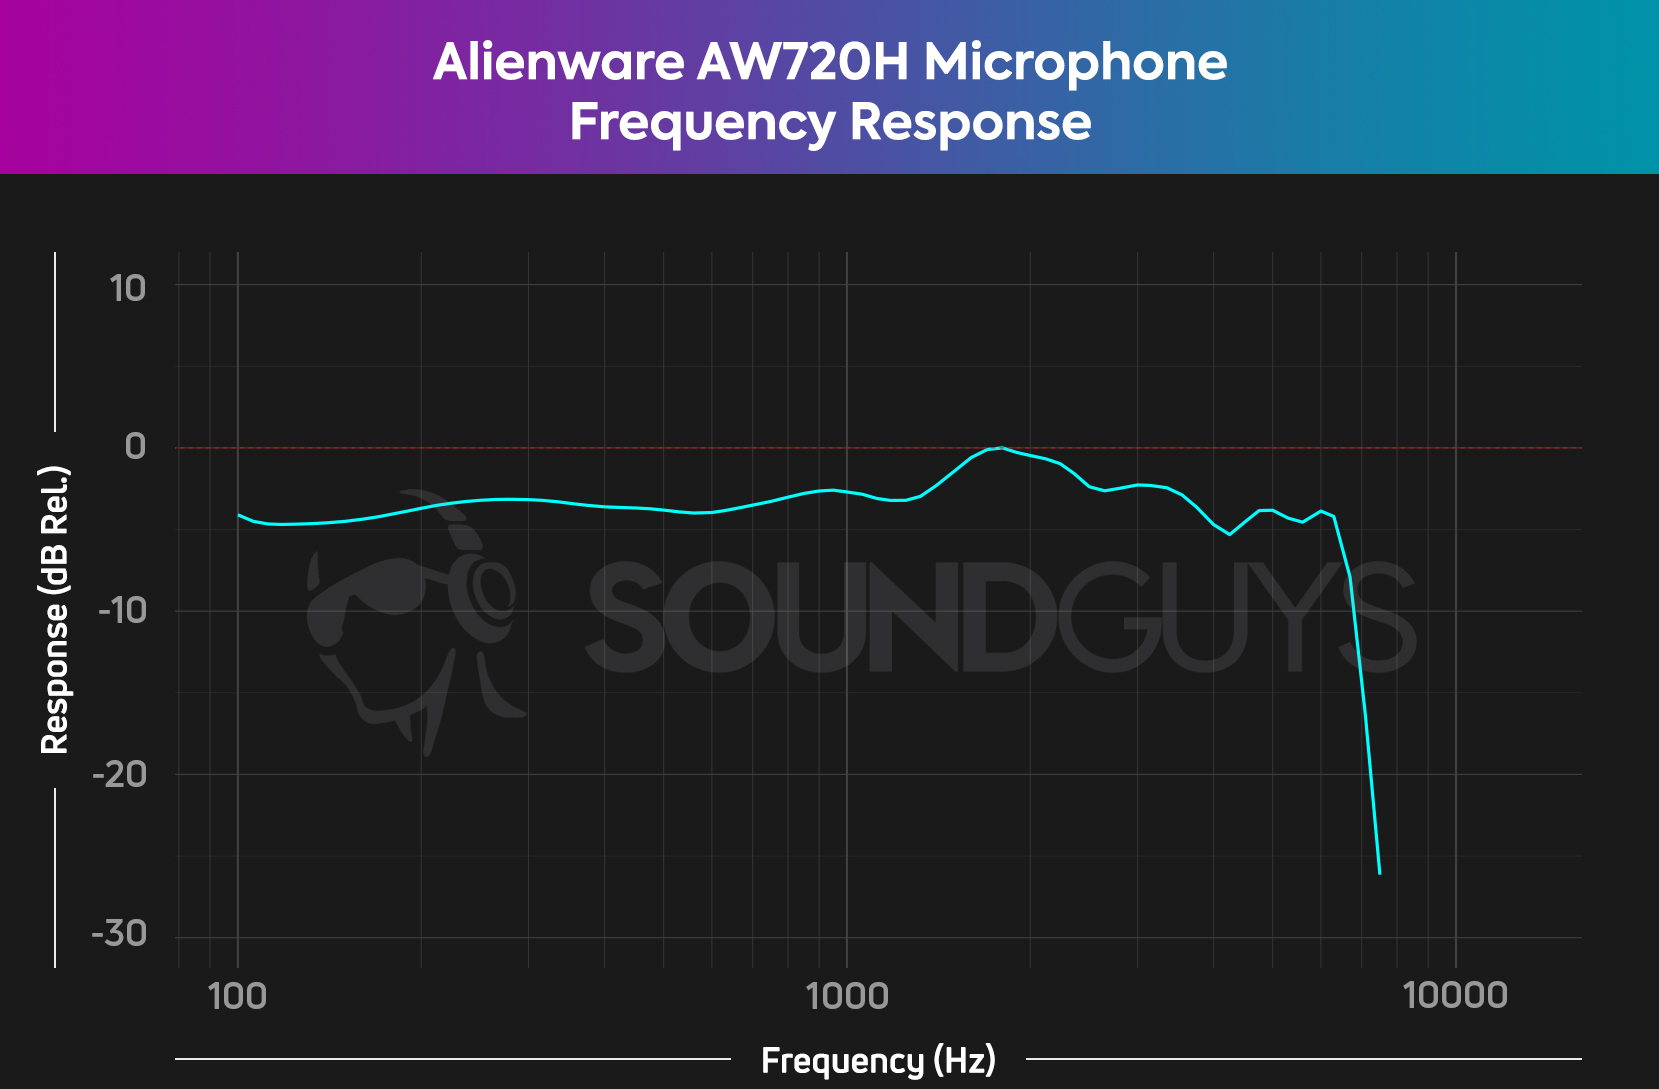 The Alienware AW720H microphone frequnecy response chart, showing a fairly flat sound and a sharp drop around 8 kHz.